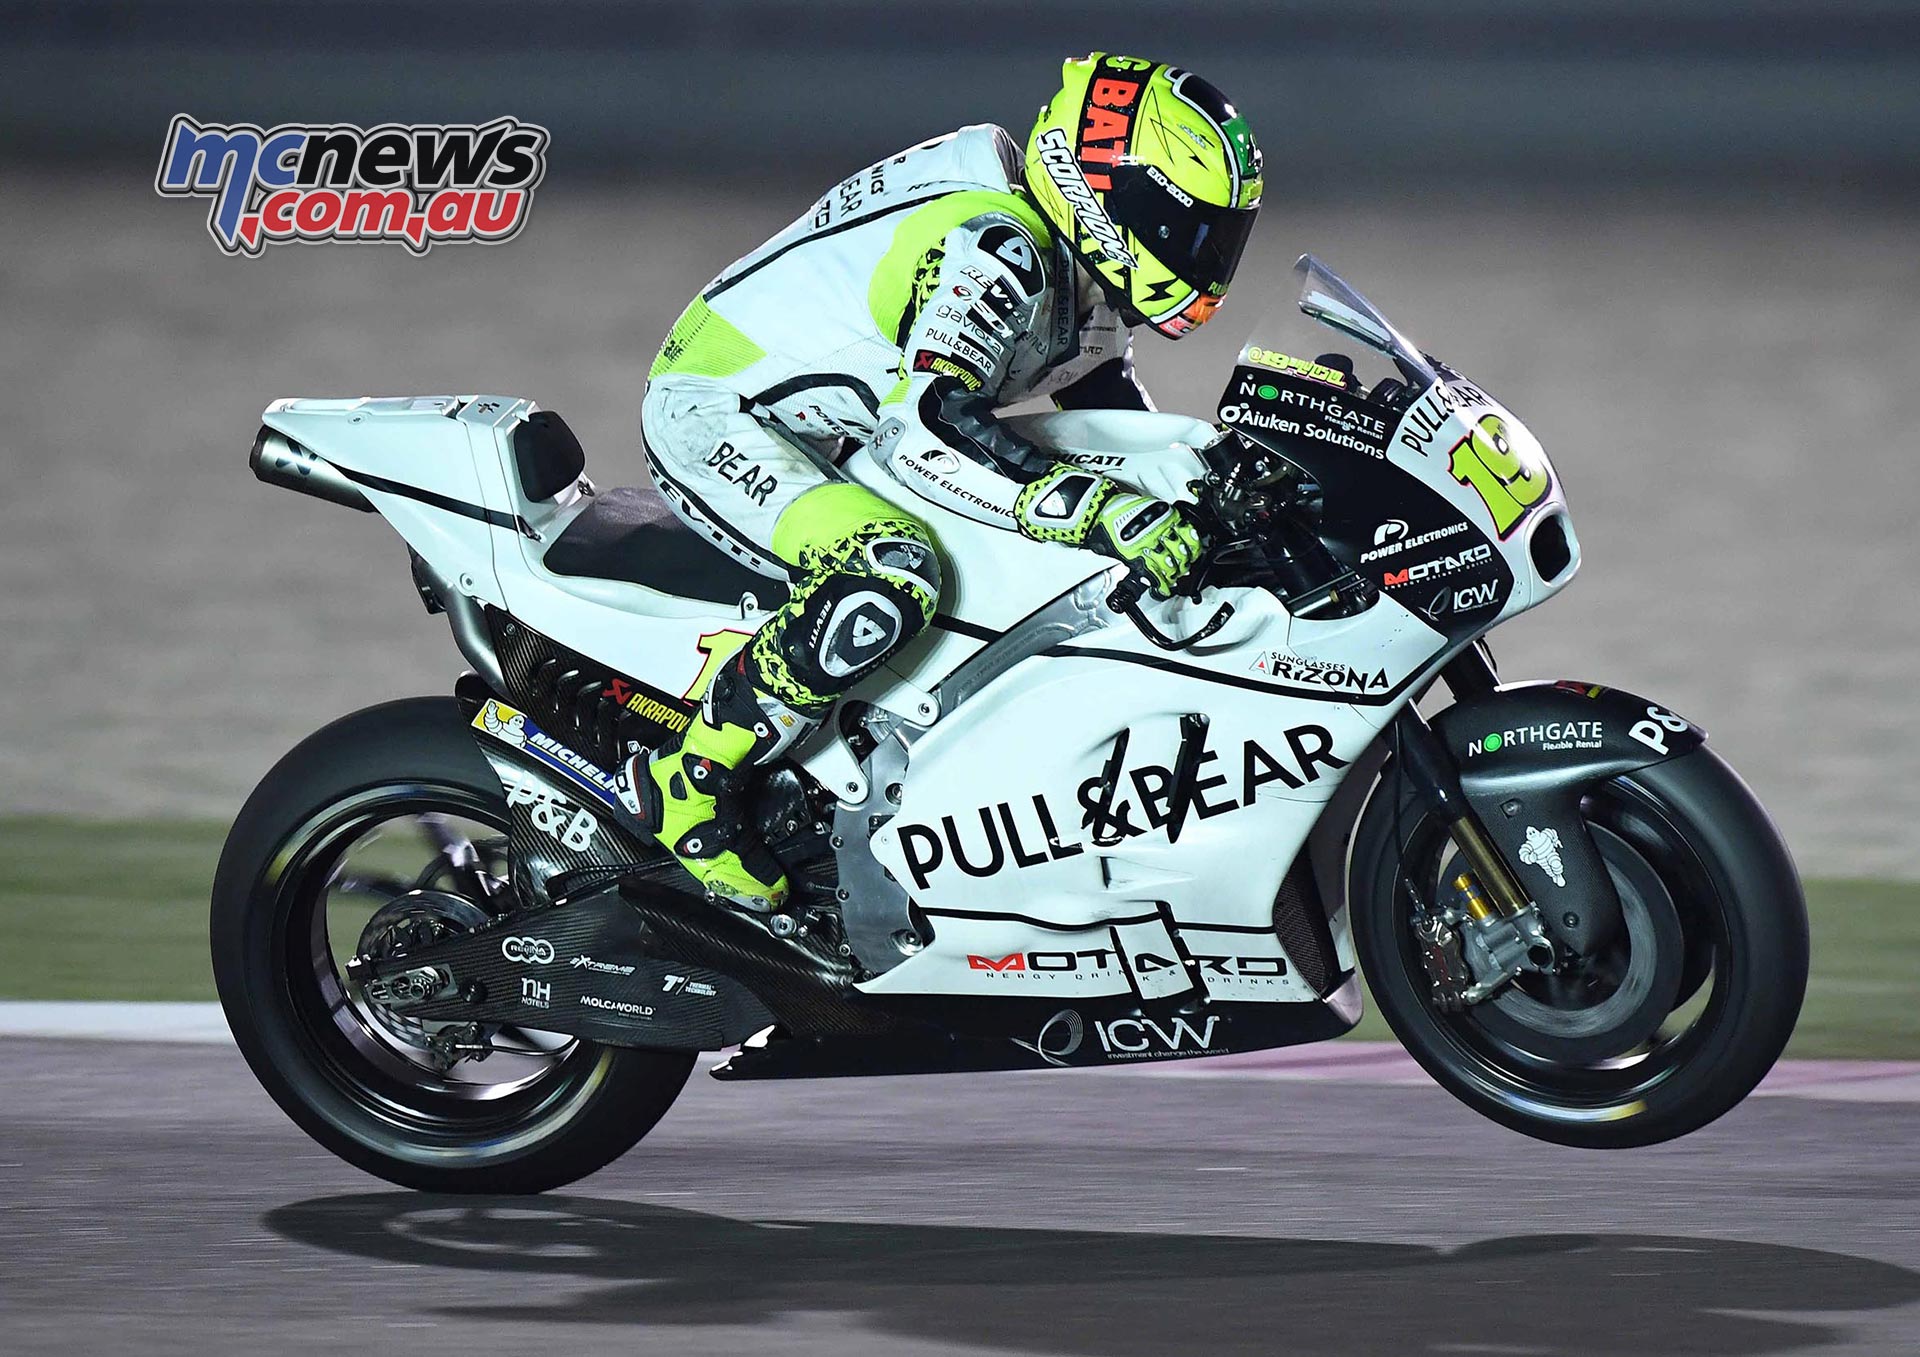 Single Second Covers Top 15 At Qatar MotoGP Test MCNewscomau